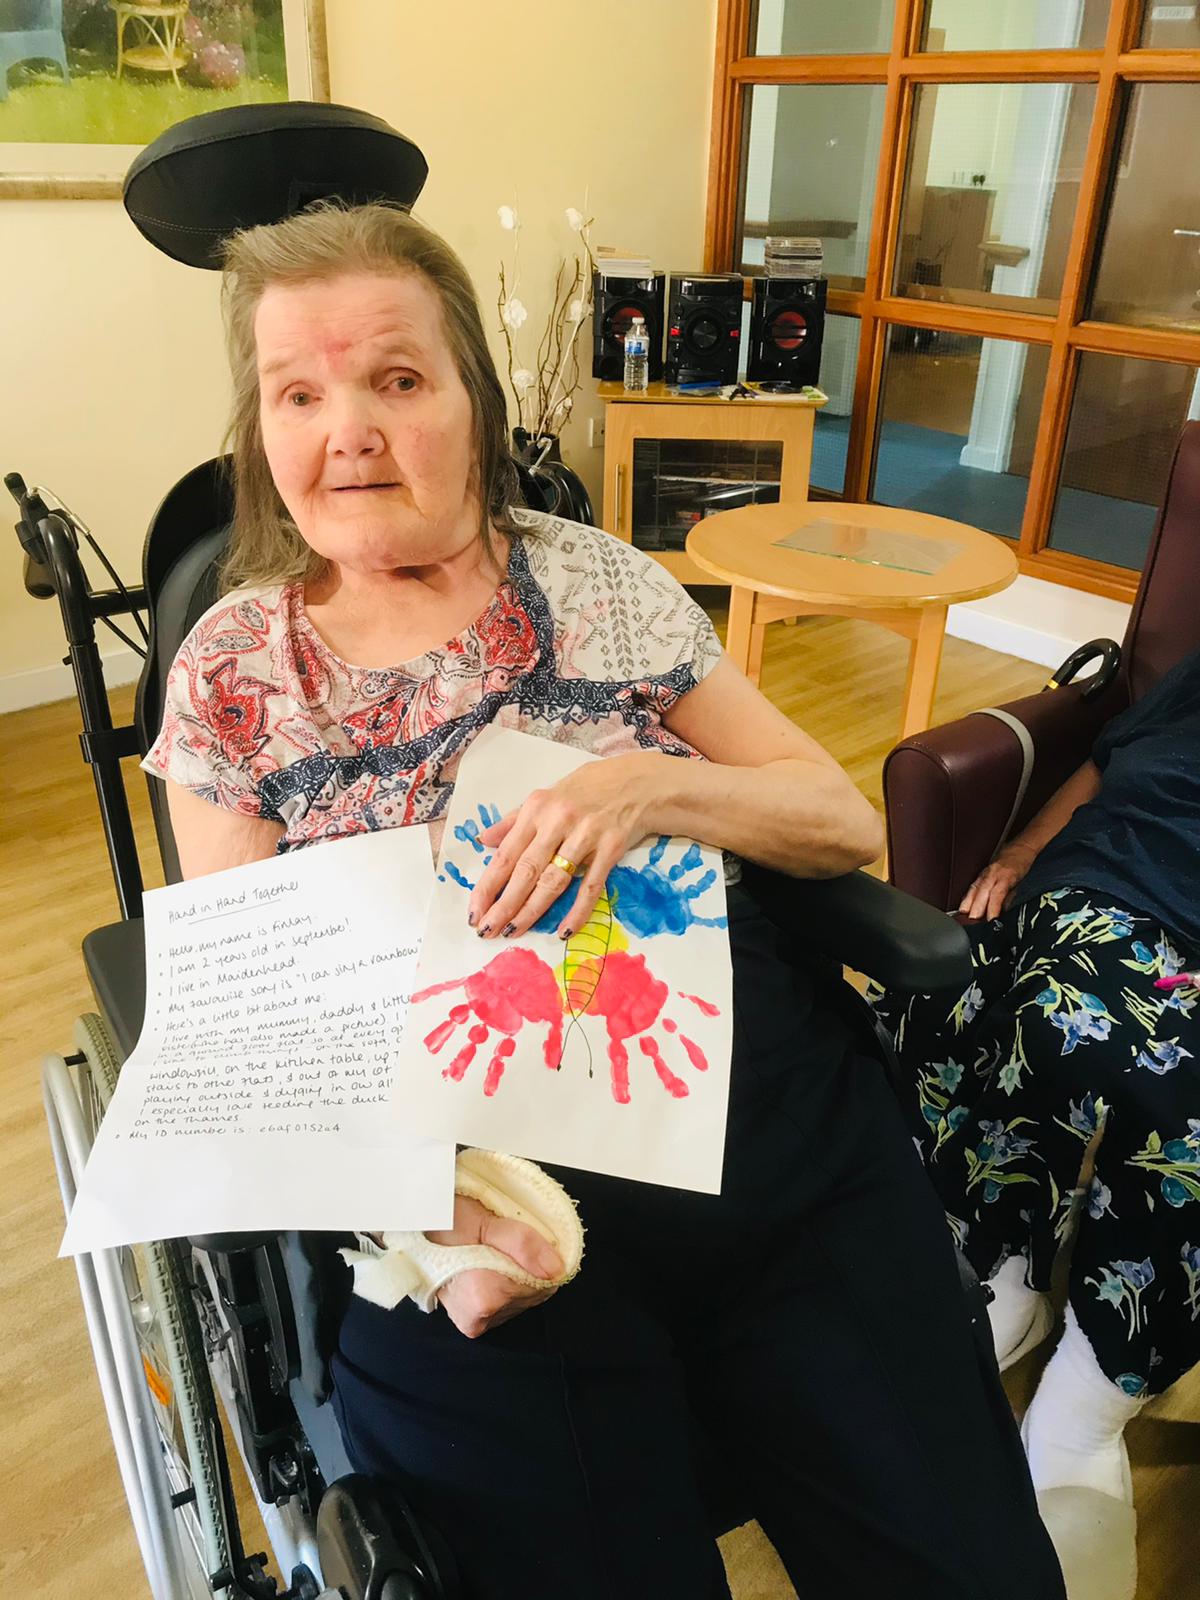 Care home resident with picture